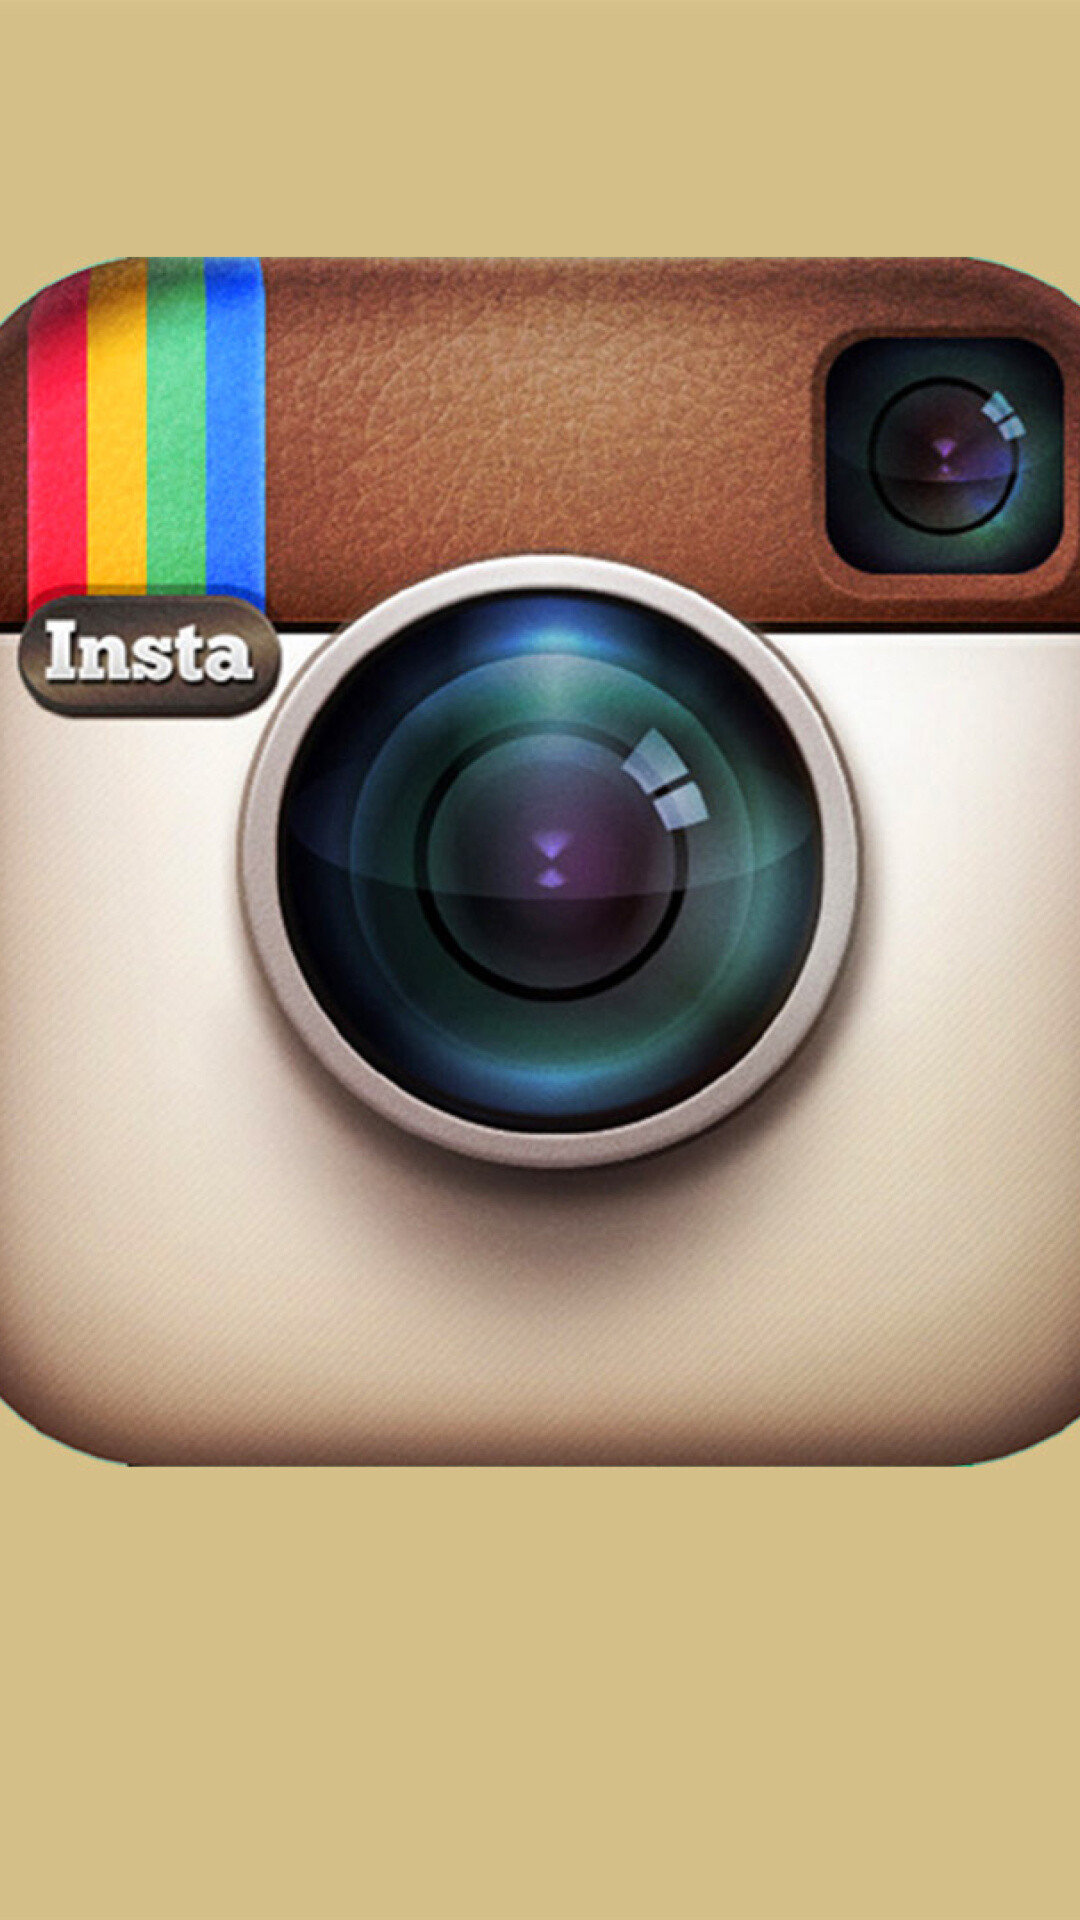 Instagram: A photo-sharing and social networking service, Meta Platforms. 1080x1920 Full HD Wallpaper.